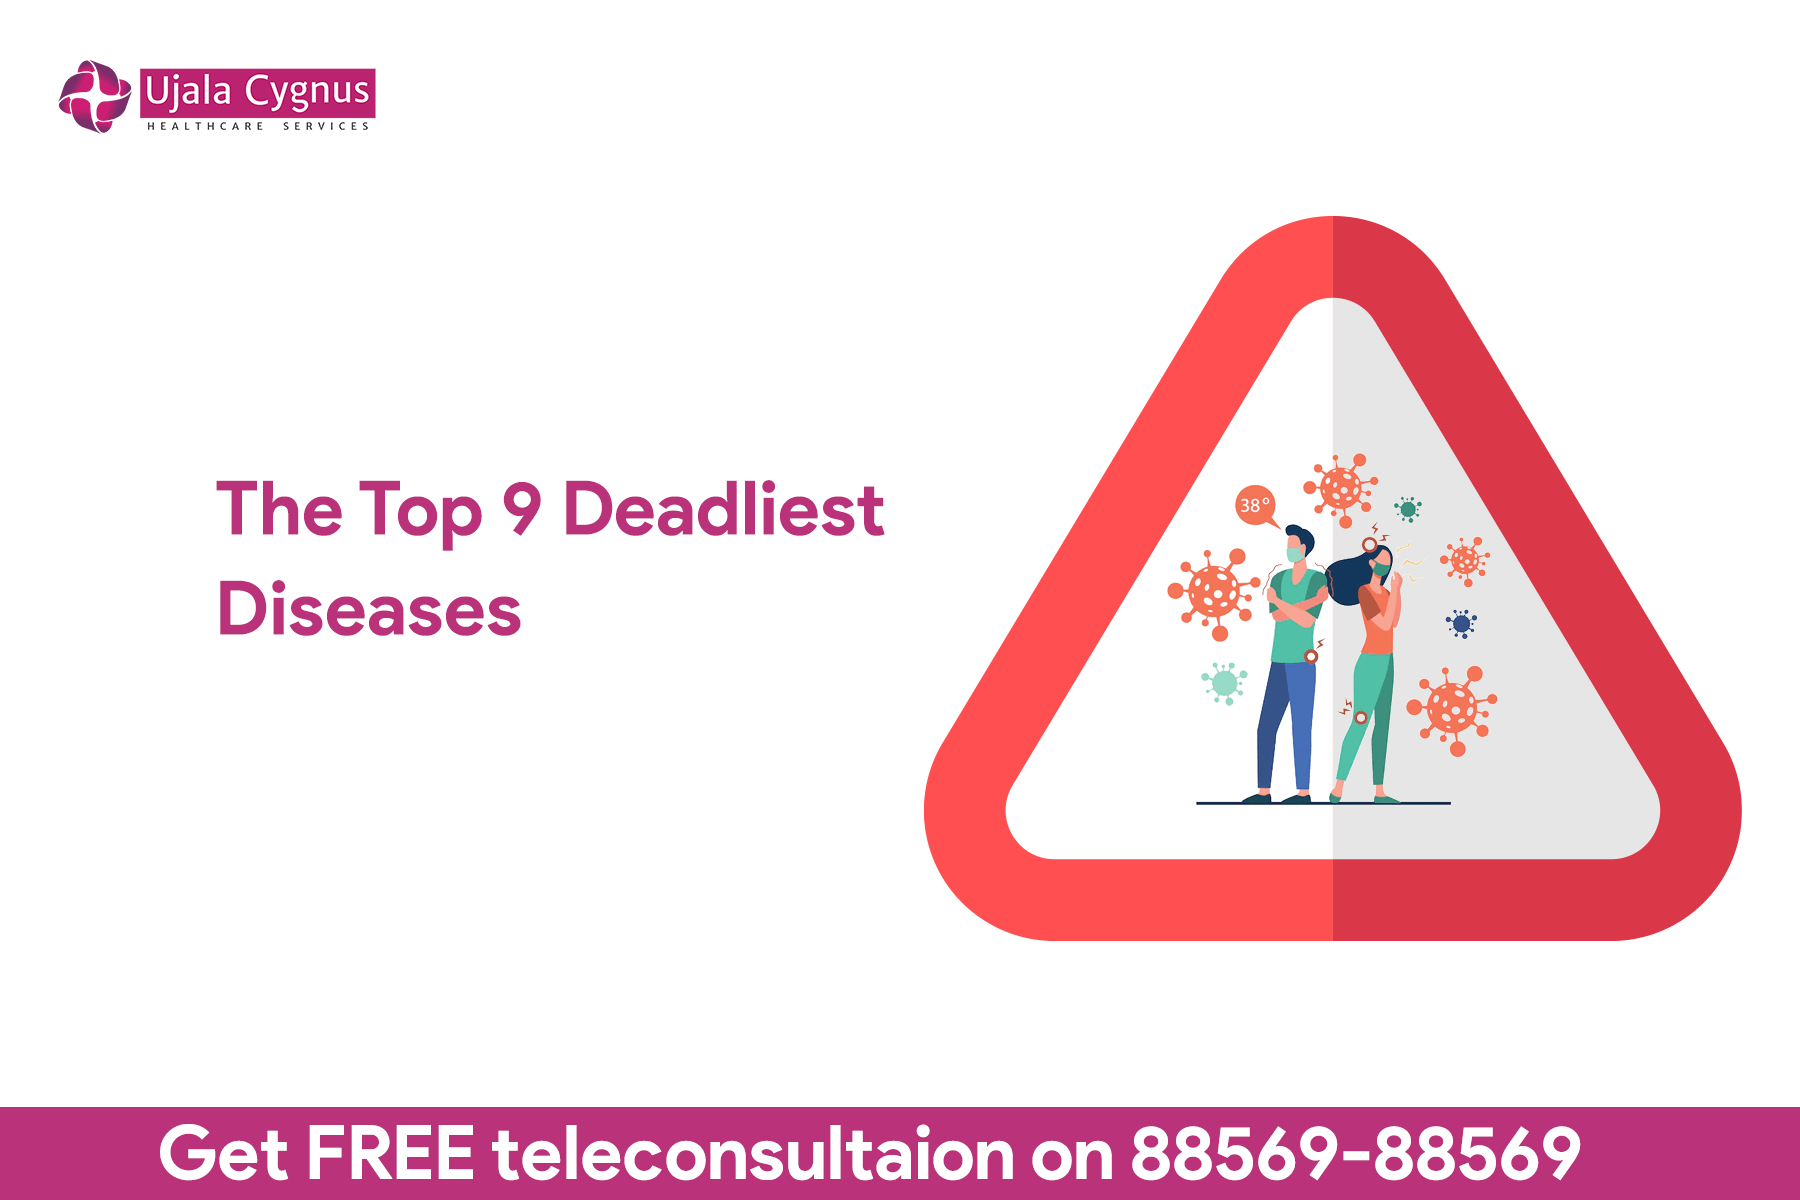 The Top 9 Causes of Death In India